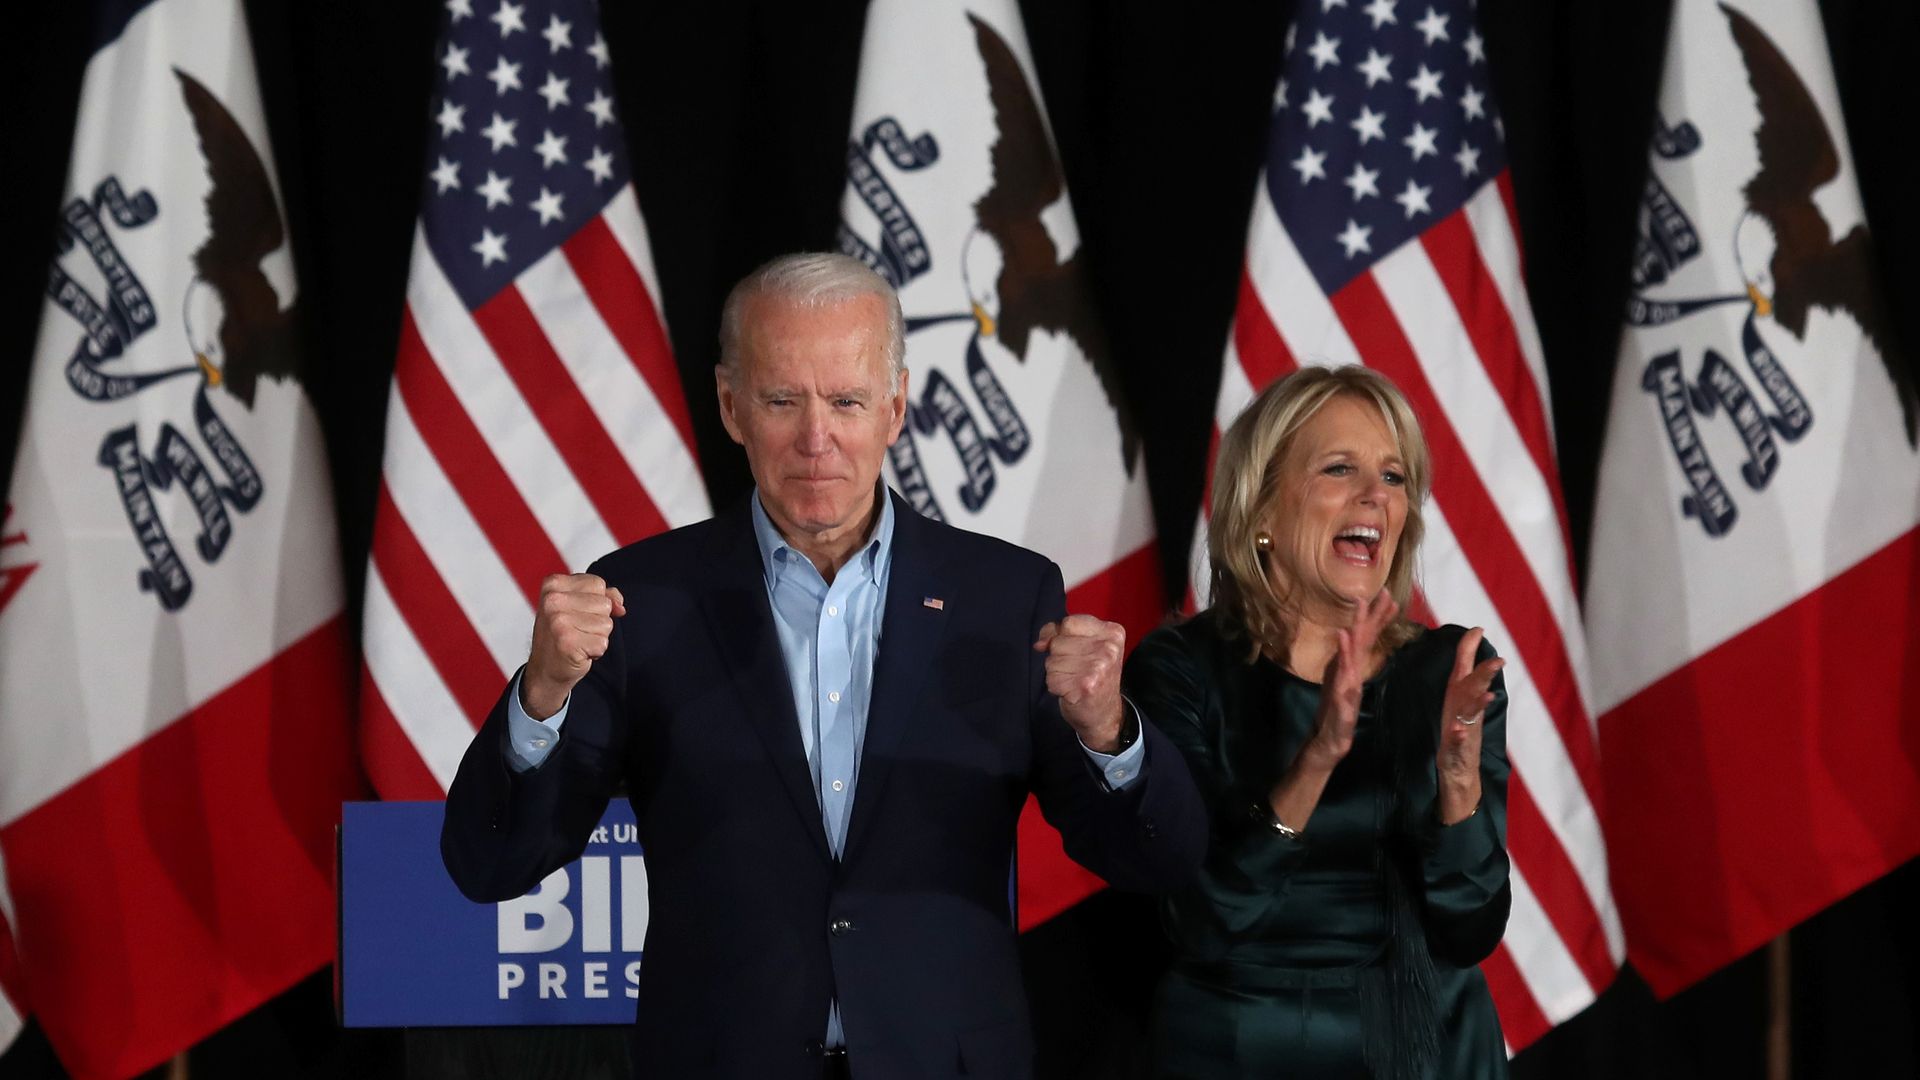 Former Vice President Joe Biden takes the stage to address supporters with his wife Dr. Jill Biden during his caucus night watch party on February 03, 2020 in Des Moines